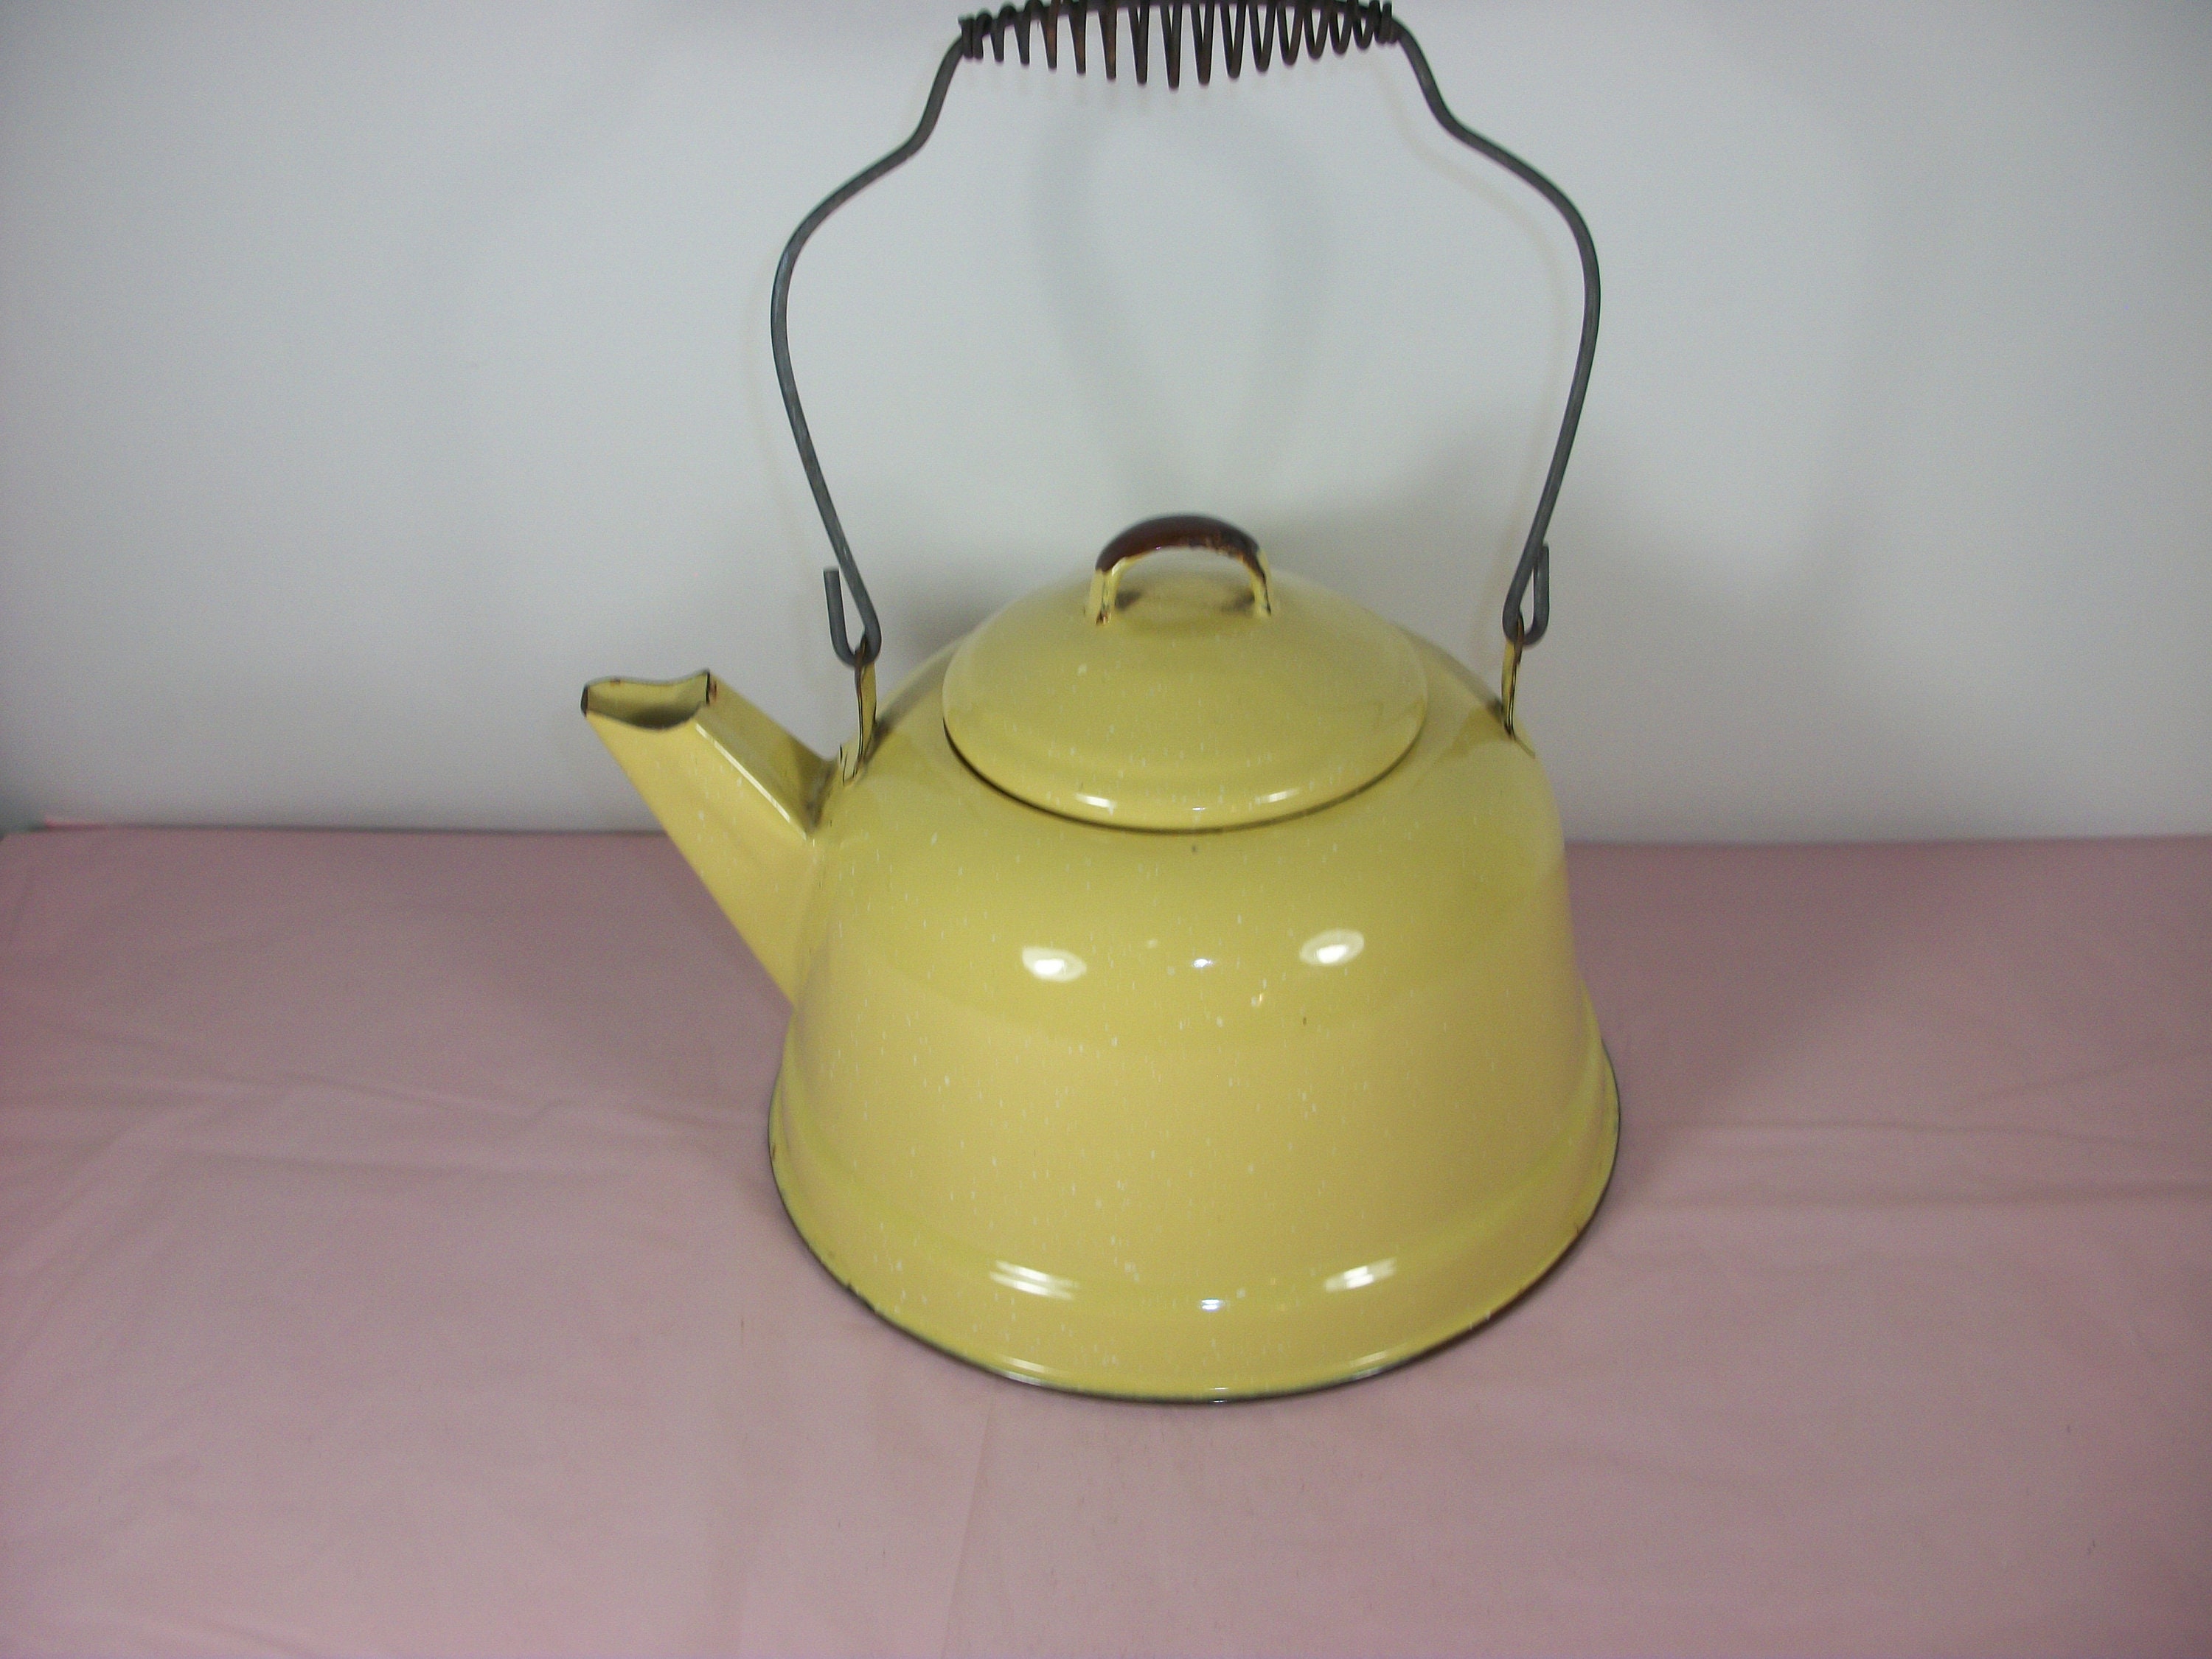 Wyxy Stainless Steel Electric Kettle, Paint Kettle, 1L Mini Teapot Yellow